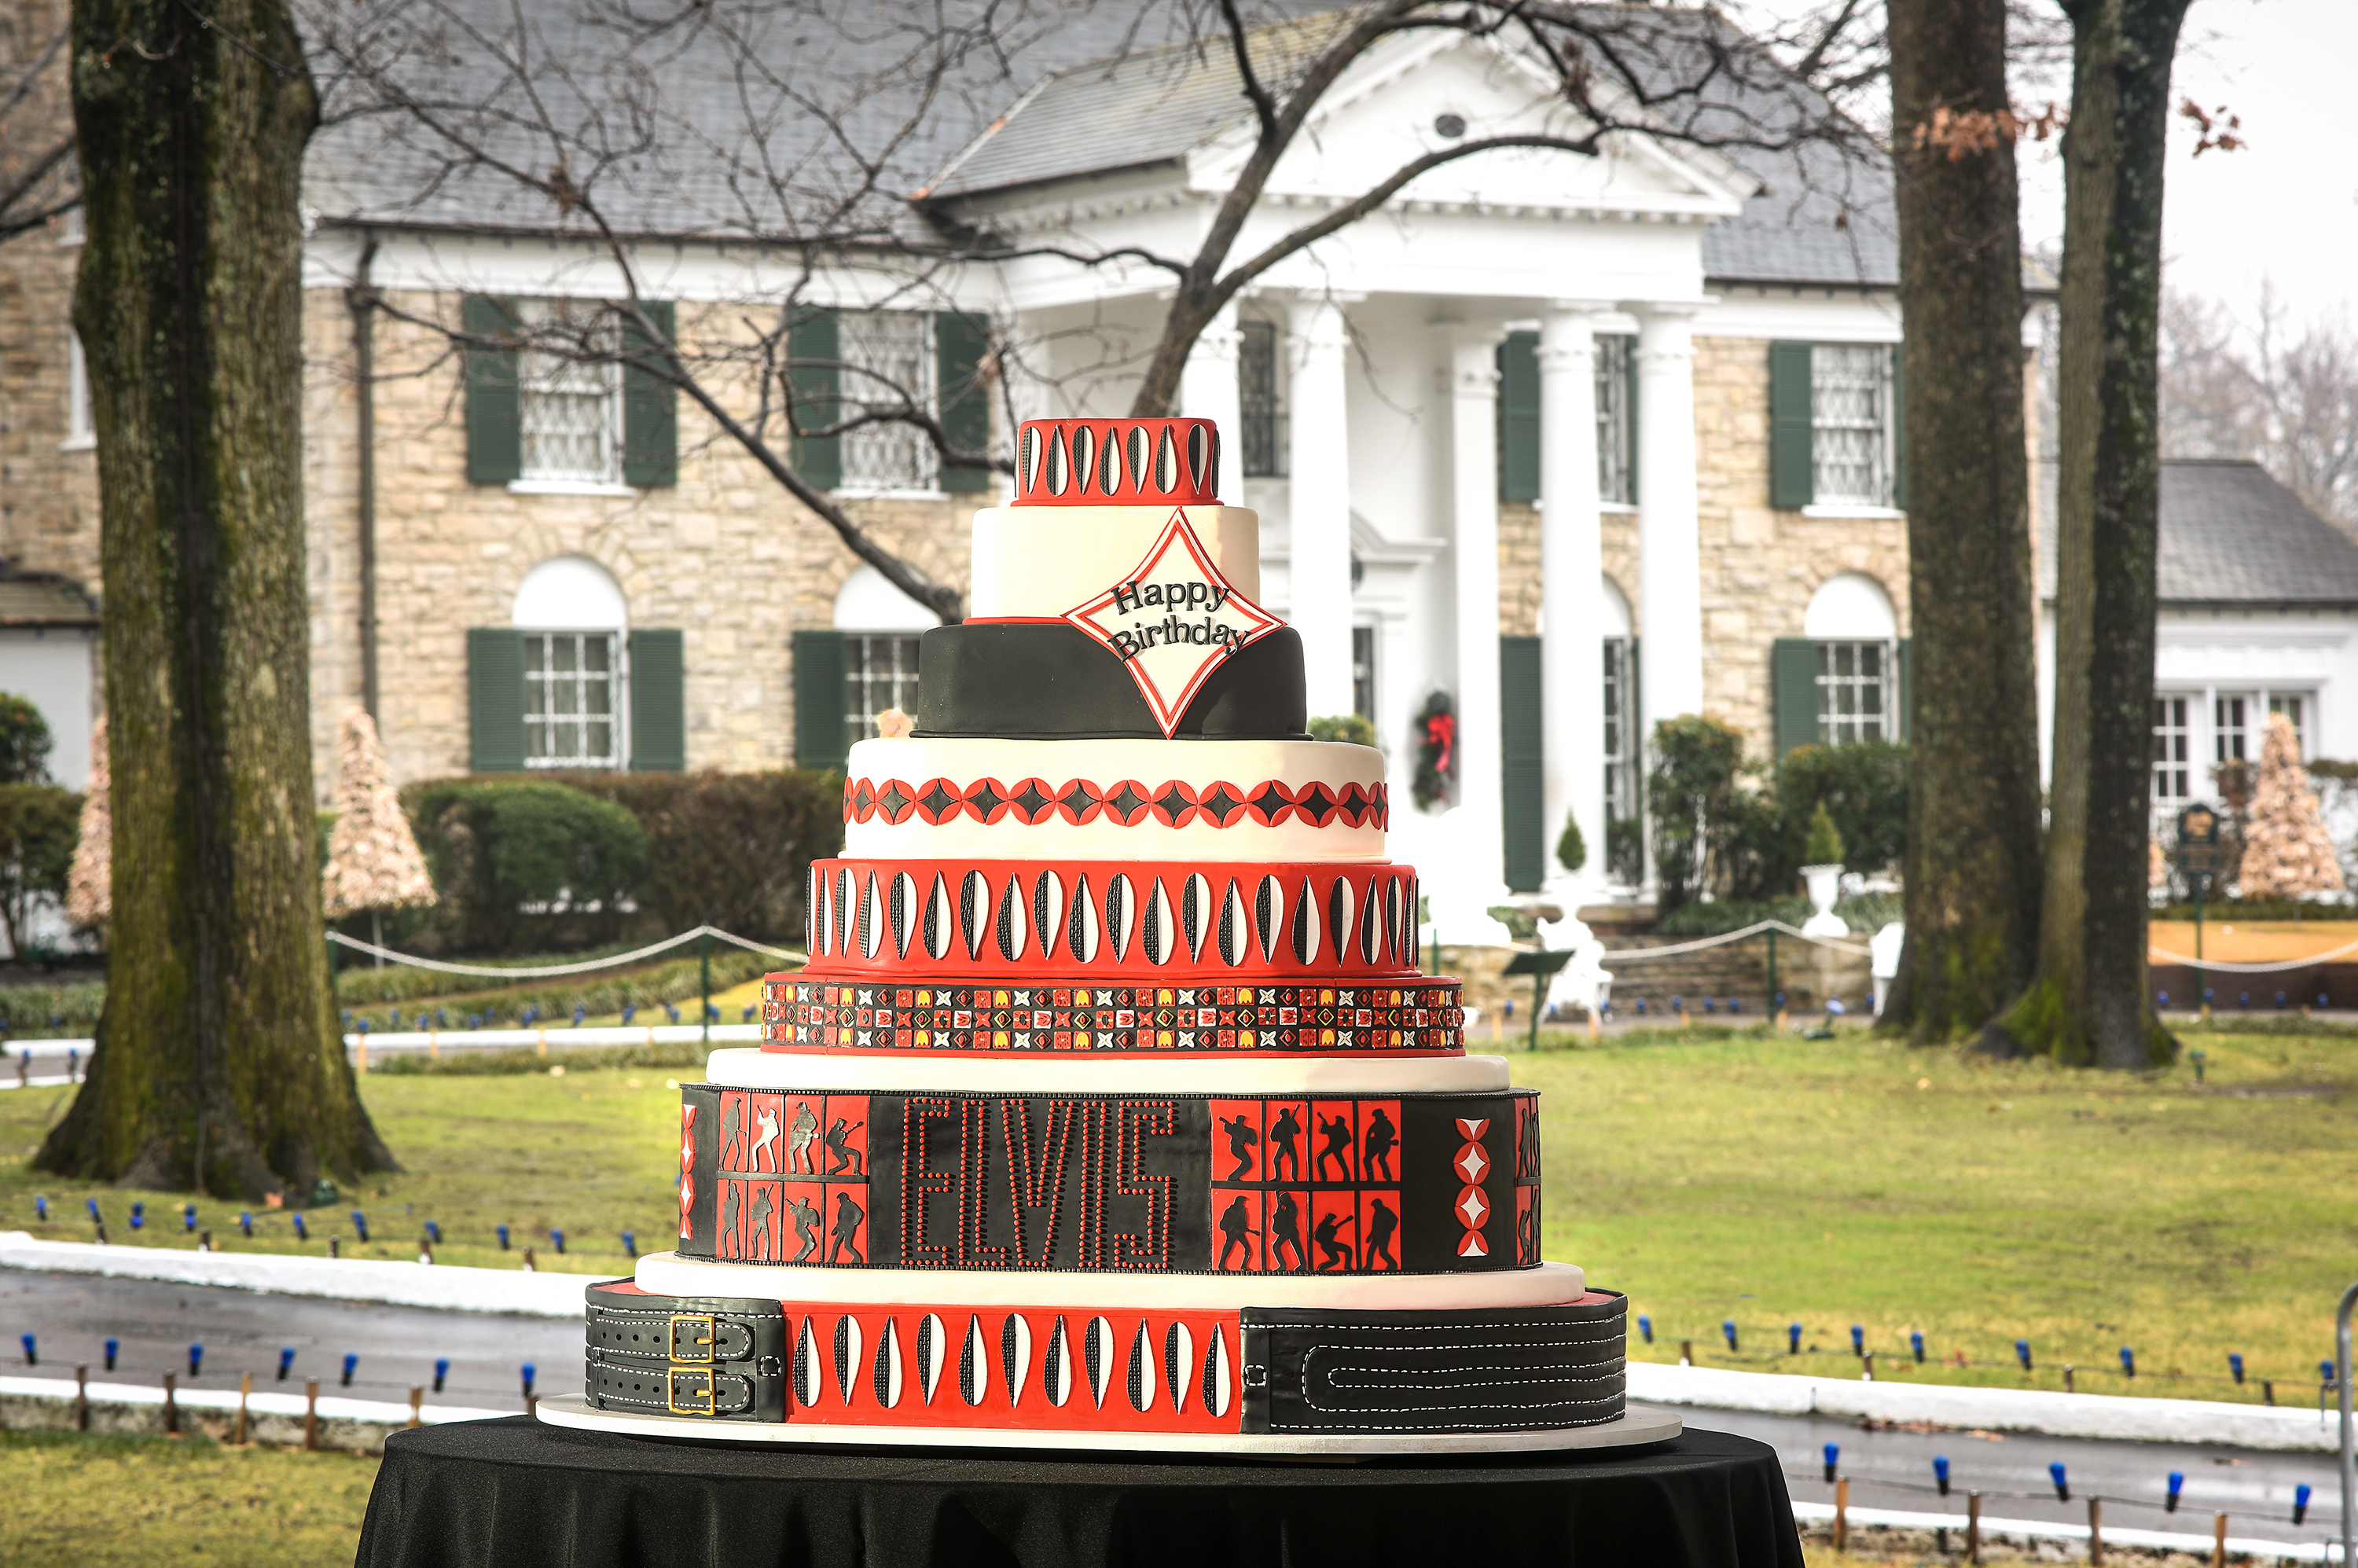 Graceland Celebrates Elvis’ Birthday with Special Events and New